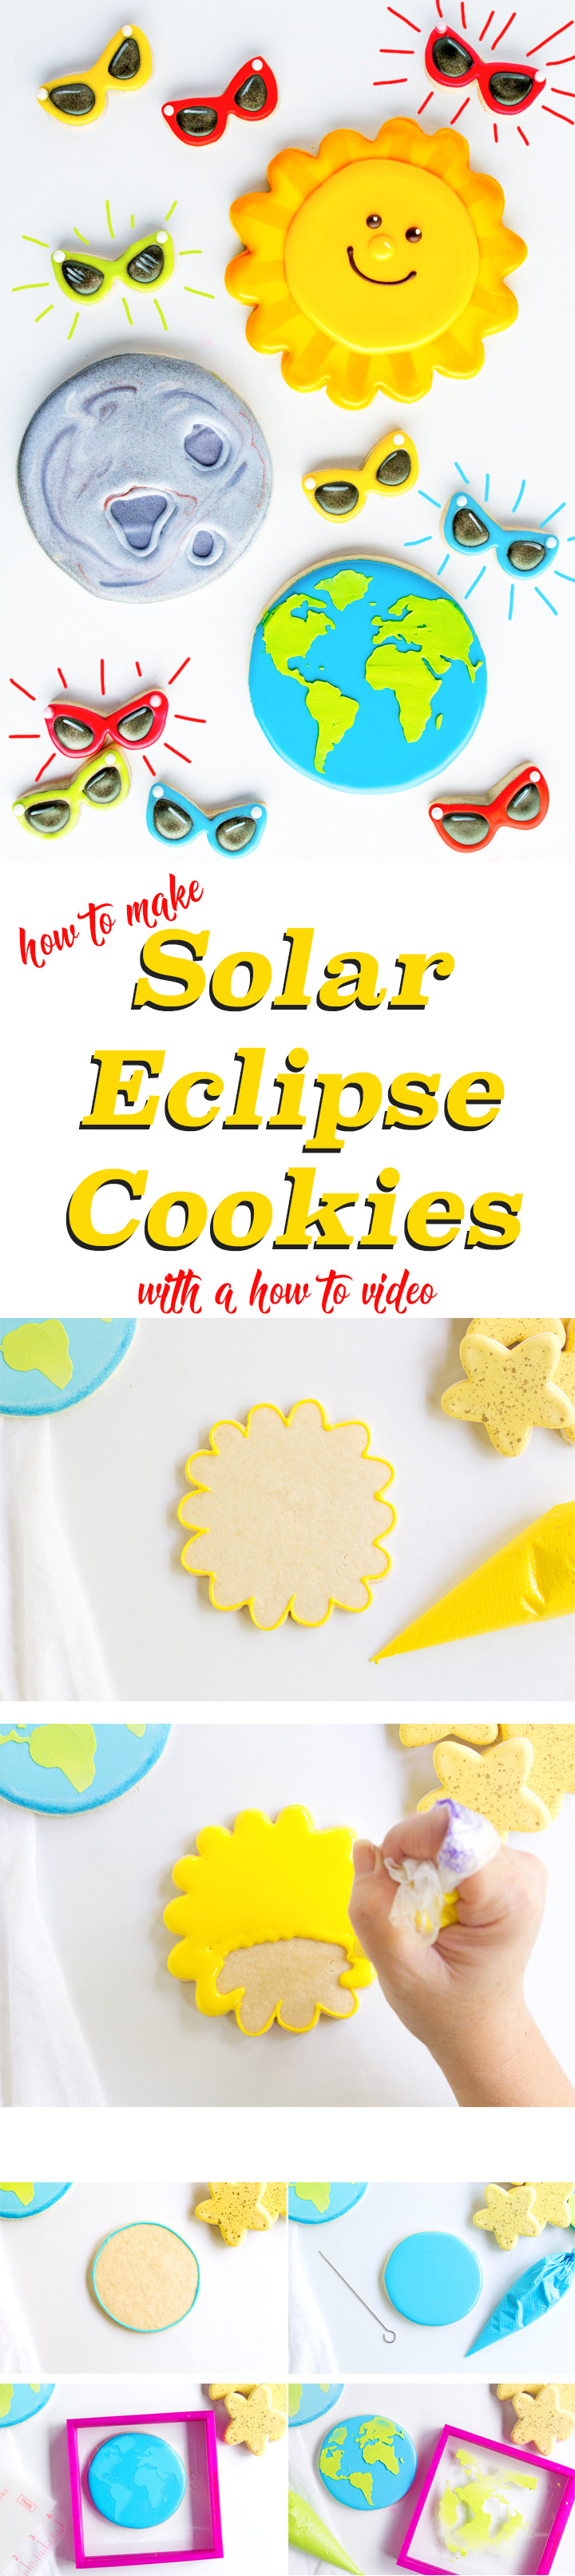 How To Make Fun Solar Eclipse Cookies with Video